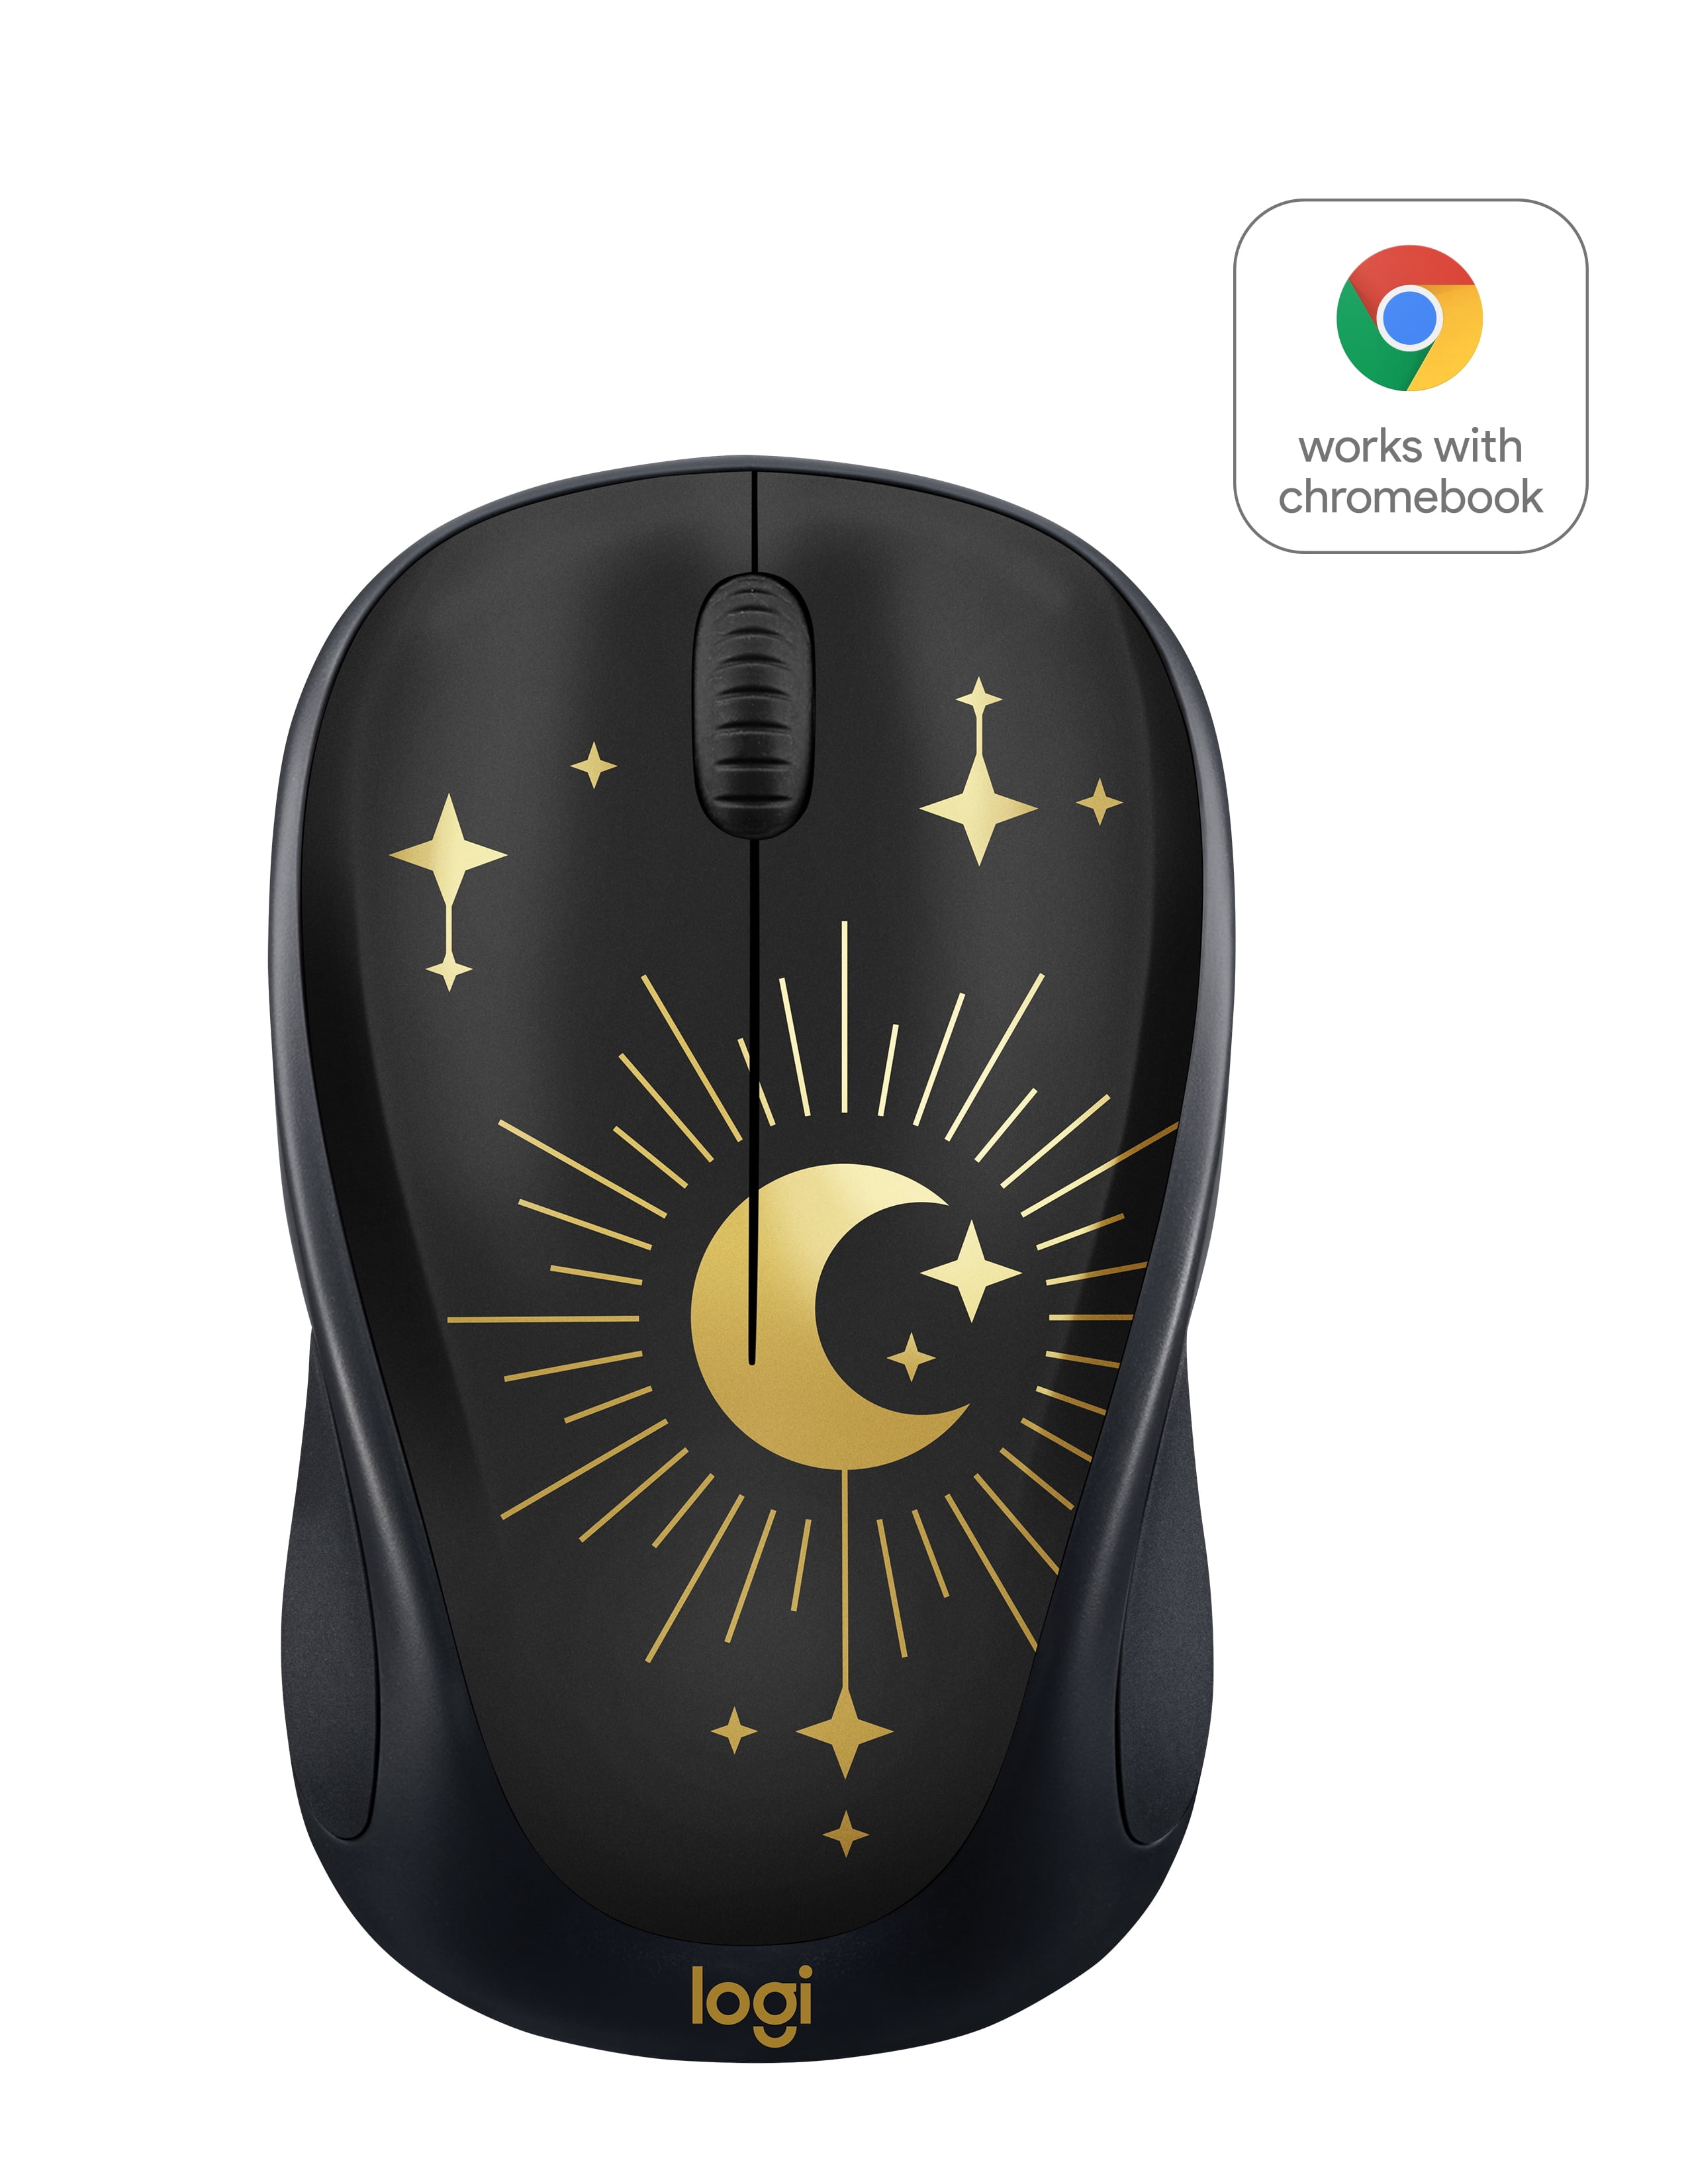 Logitech Compact Wireless Mouse, 2.4 GHz with USB Unifying Receiver, 1000 DPI Optical Tracking, 18-Month Life Battery, PC / Laptop / Chromebook, Magic Night - Walmart.com